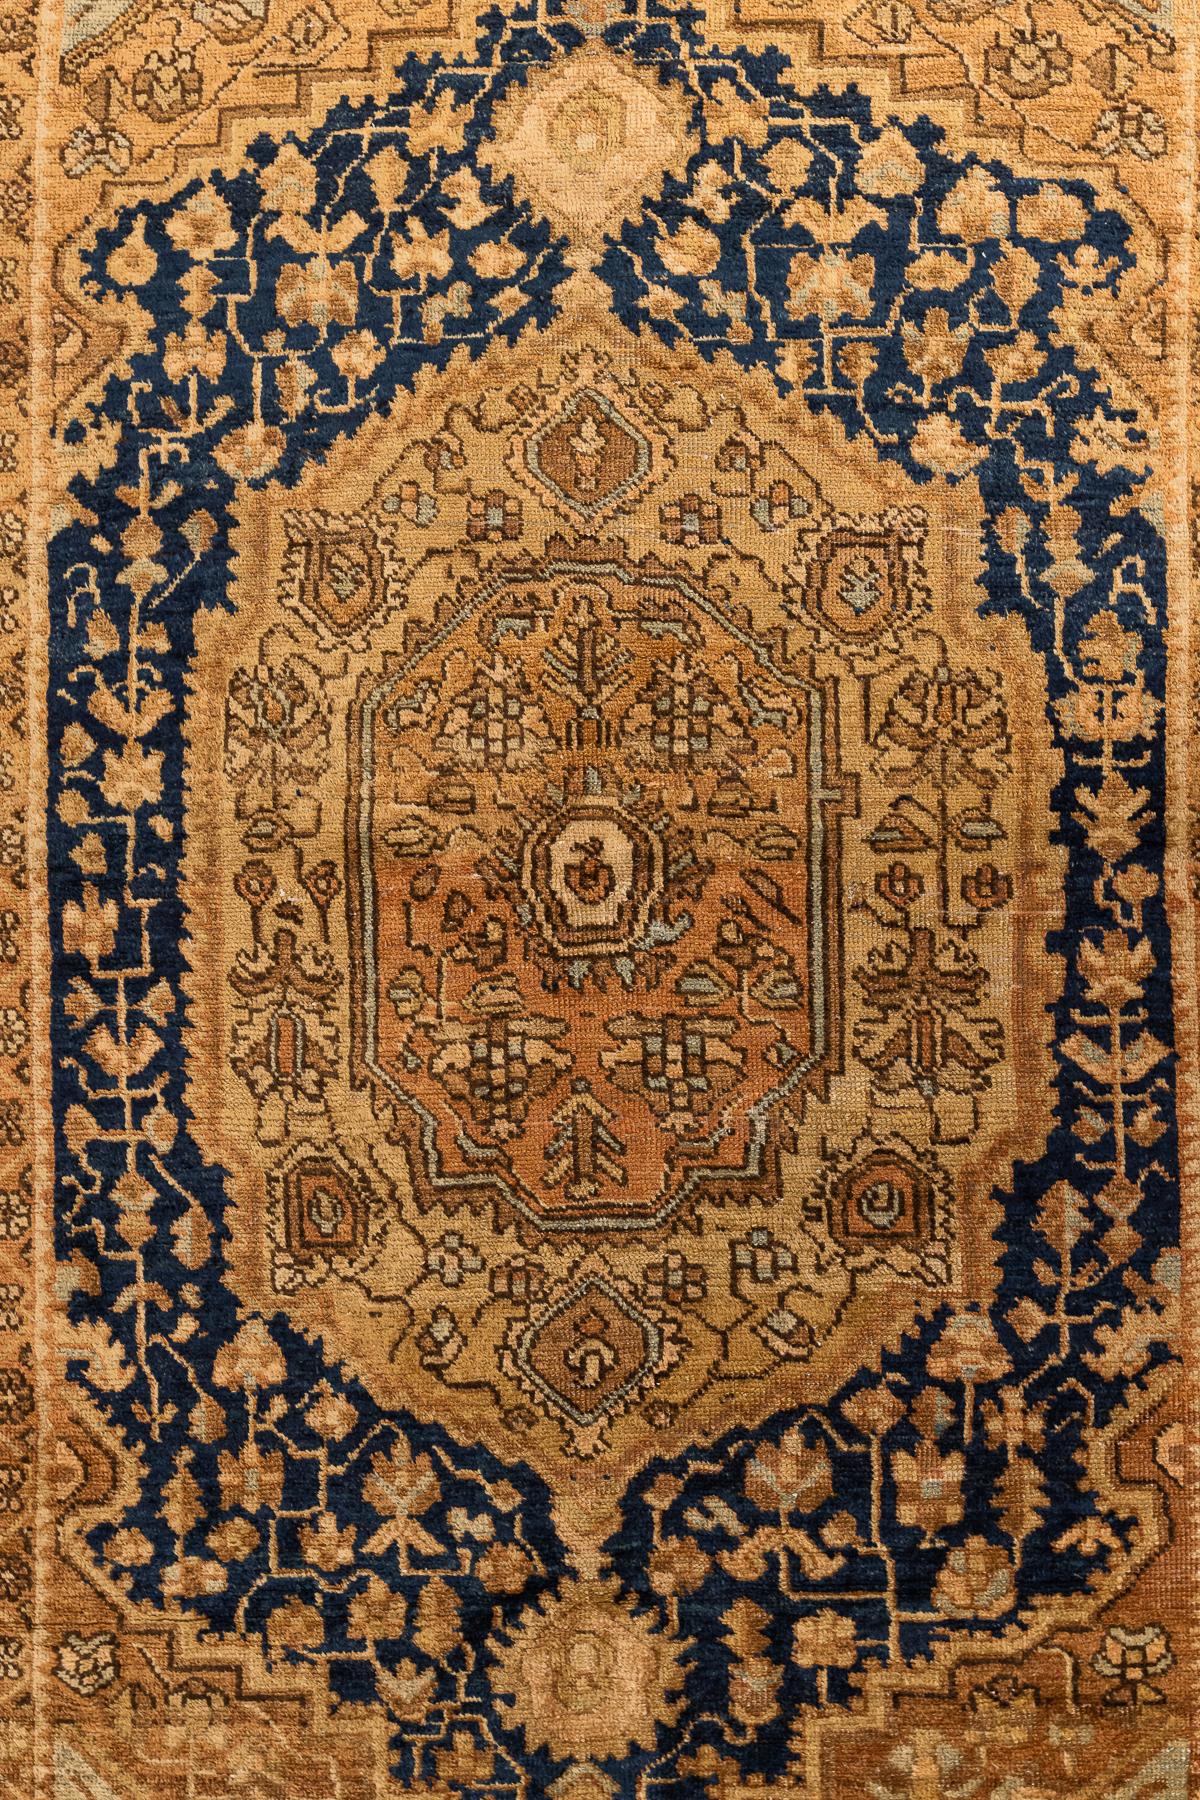 Farahan Sarouk – West Persia

This magnificent Farahan features an intricate design with geometric and floral patterns. The predominant colours are dark blue, gold, and orangey beige shades. The centre of the rug showcases an oval medallion adorned